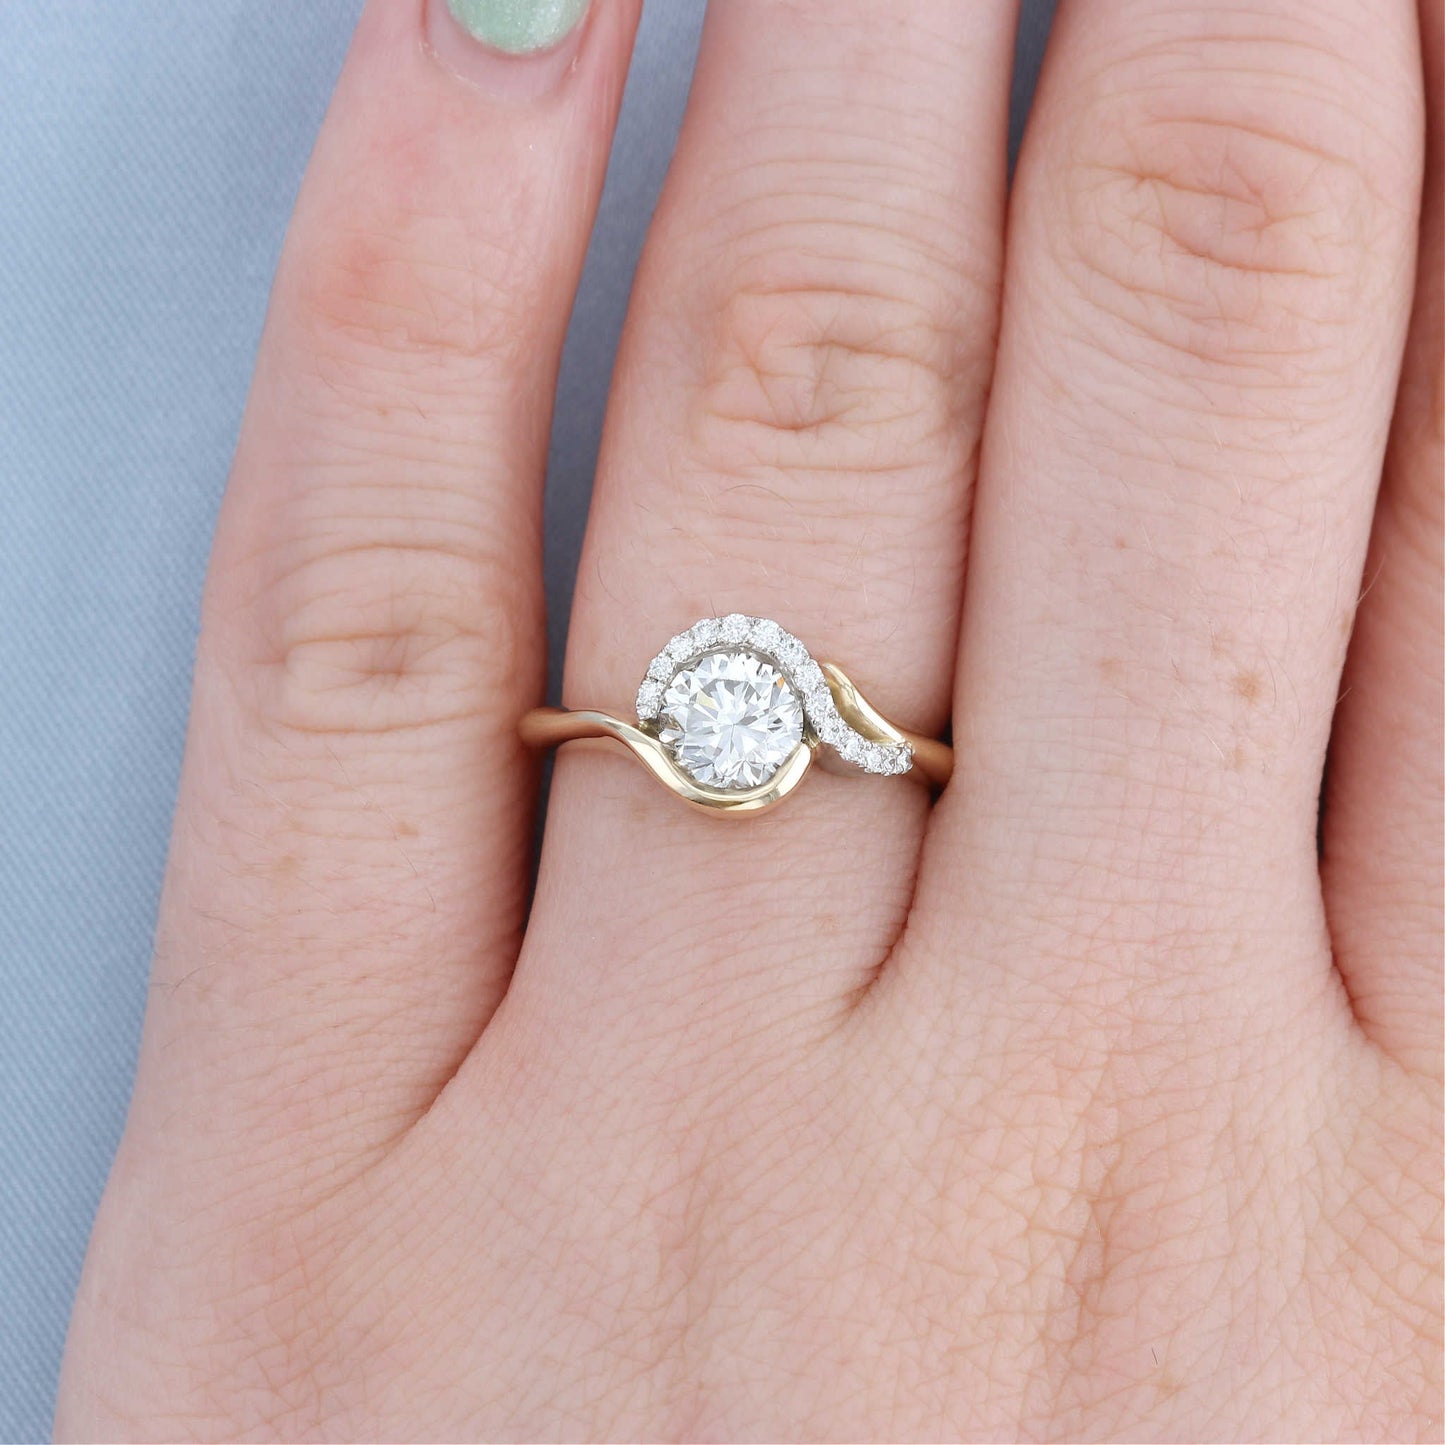 Swish Bypass Diamond Halo Engagement Ring on a Finger